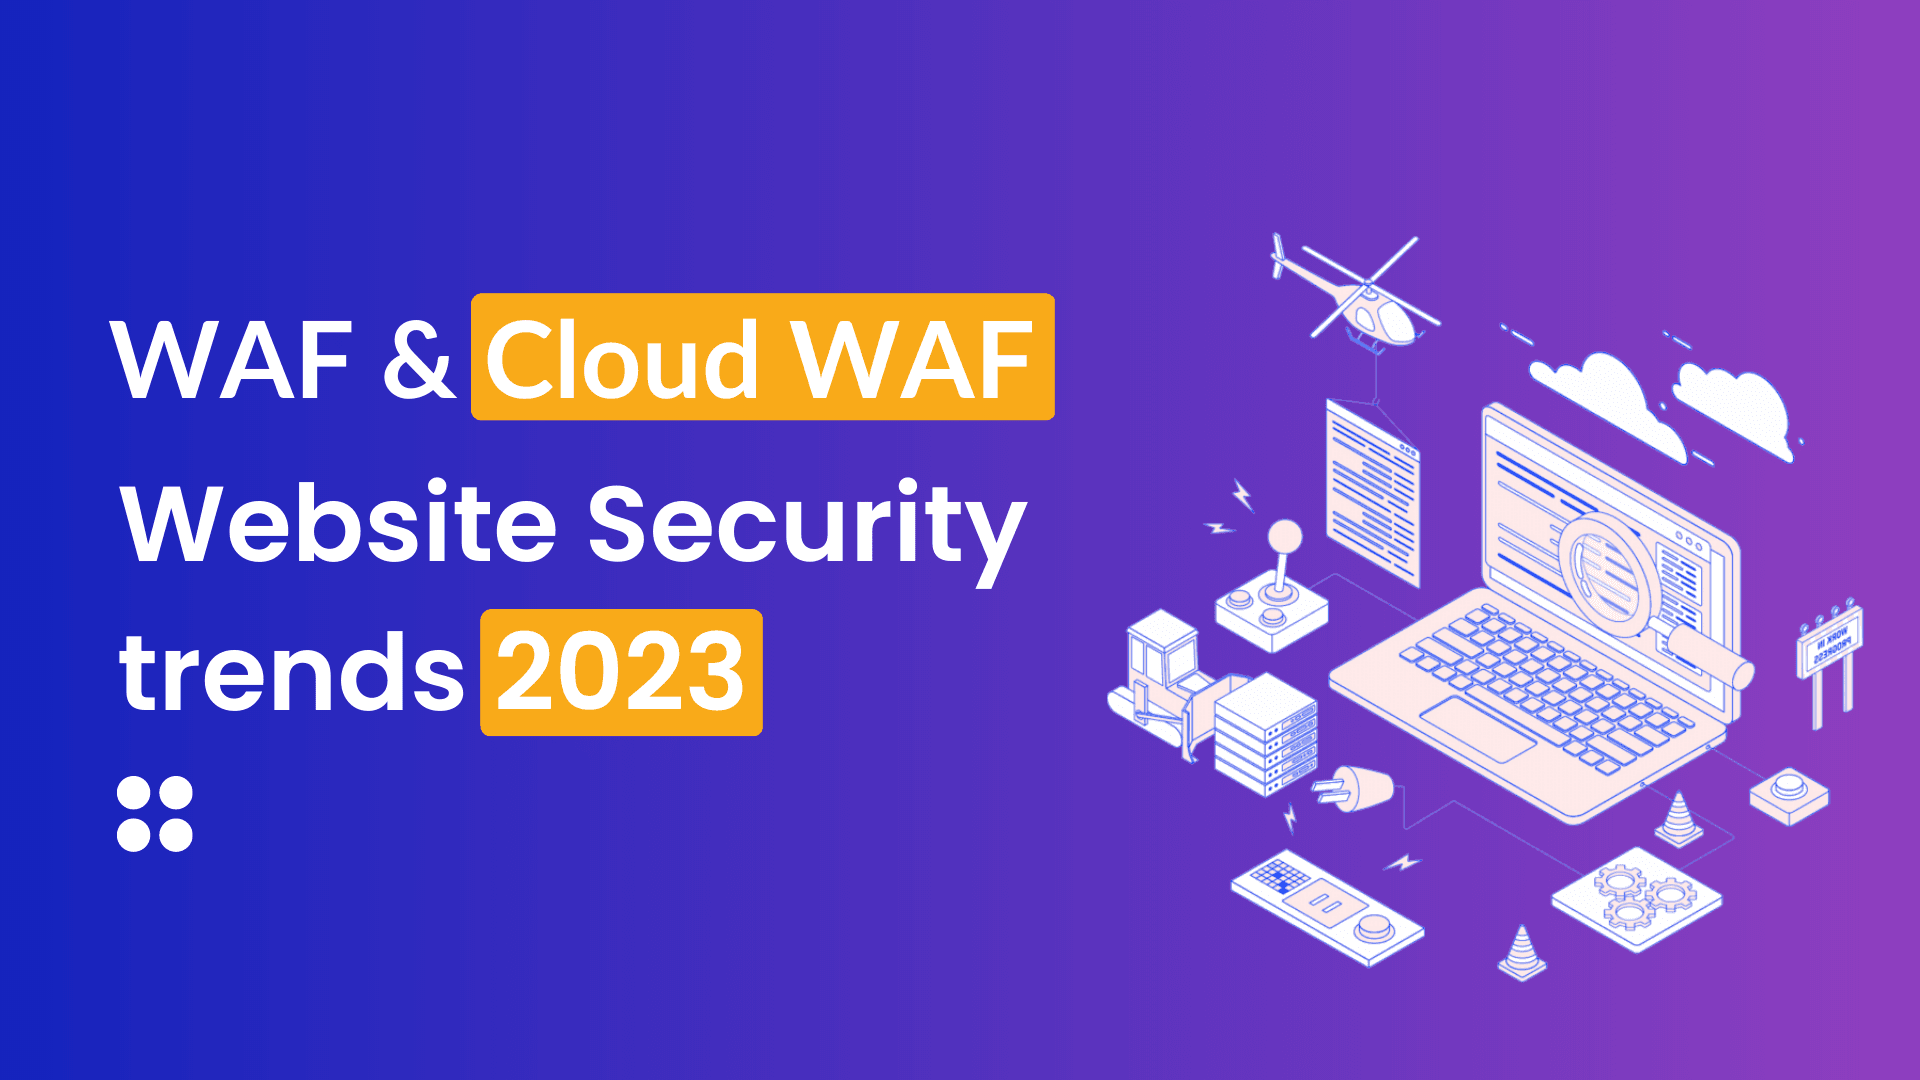 WAF and Cloud WAF: Website Security trends in 2023